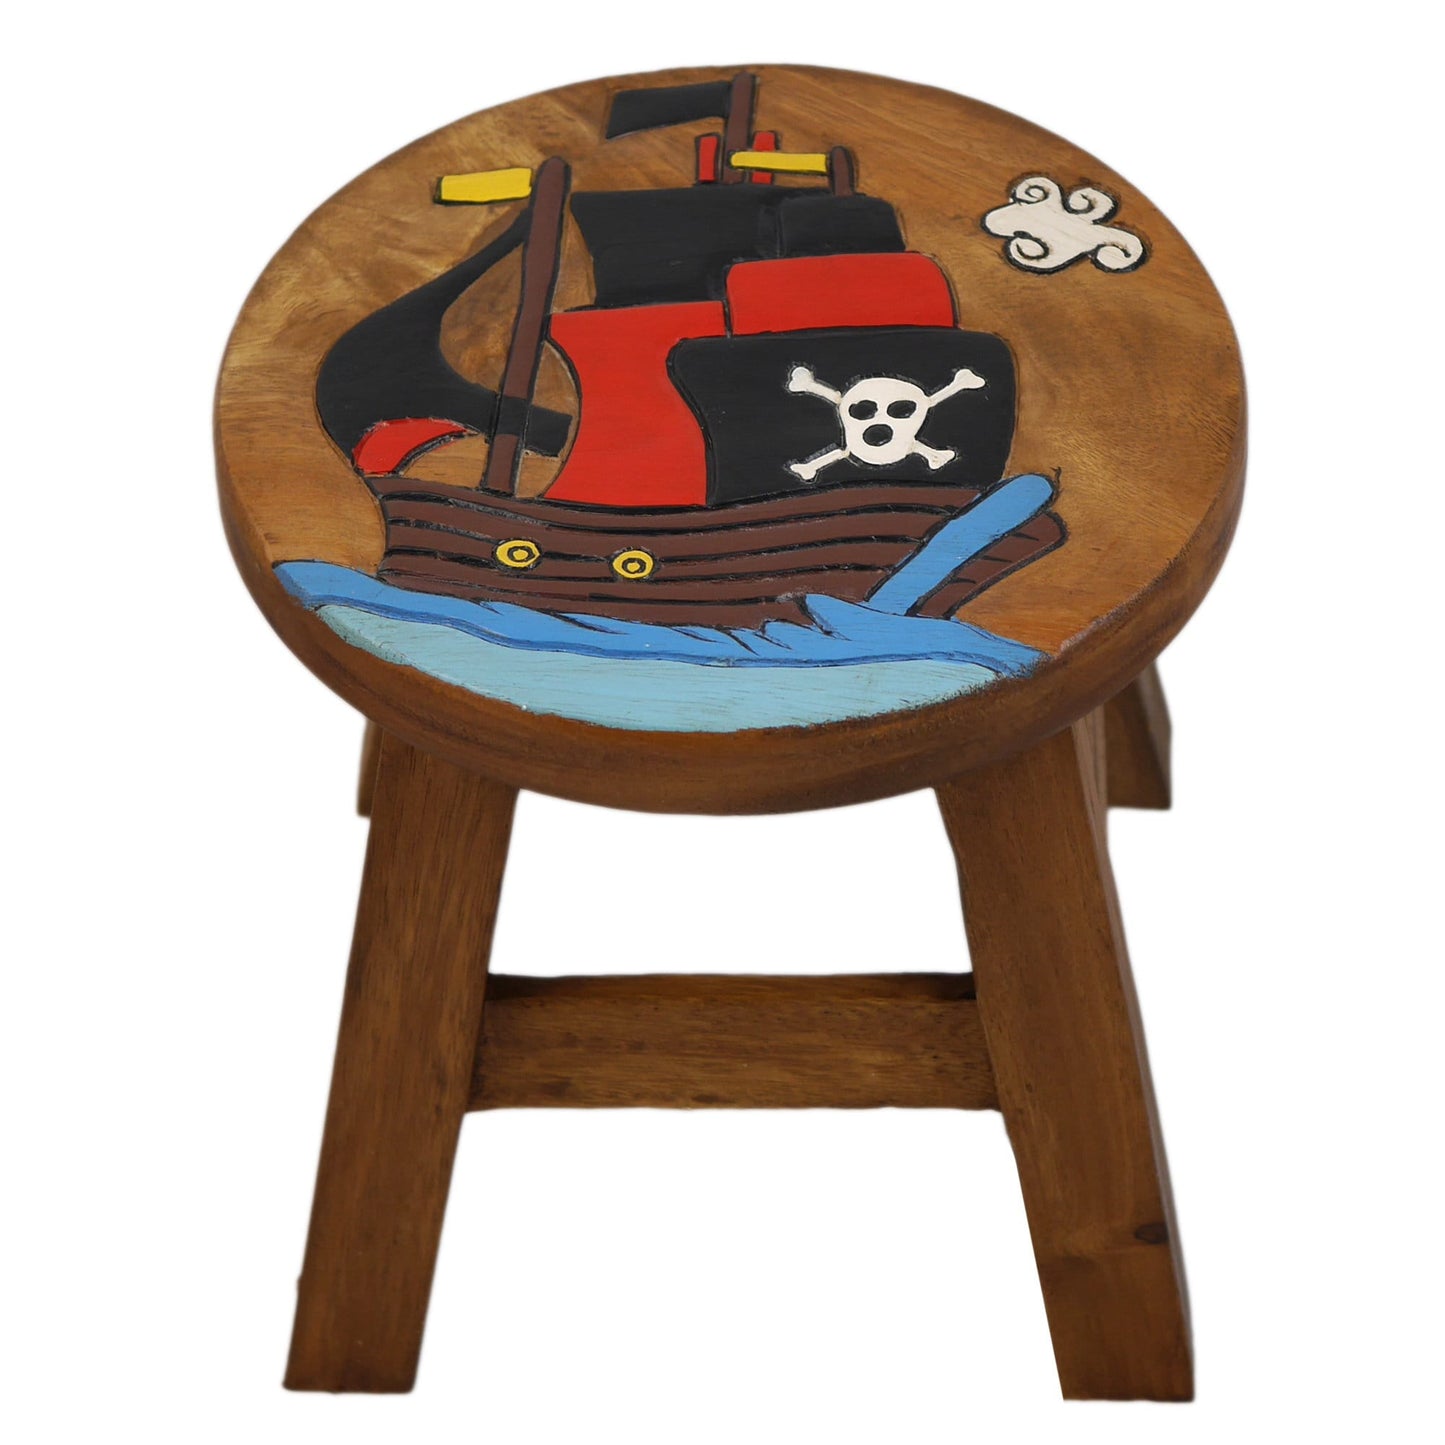 Children's stool wooden stool with pirate ship painted and carved height 25 cm